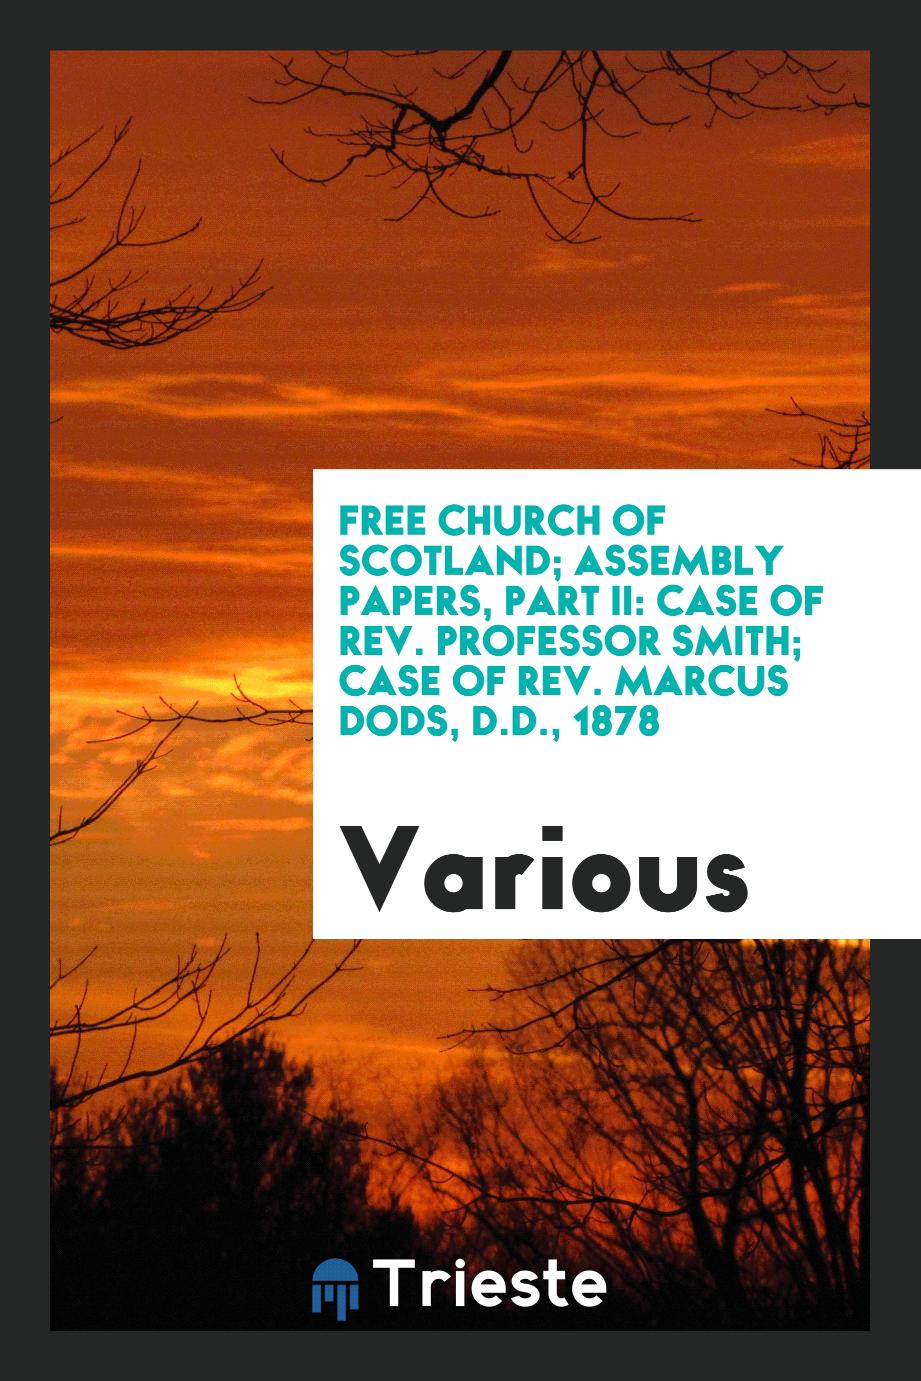 Free Church of Scotland; Assembly papers, part II: case of Rev. Professor Smith; case of Rev. Marcus Dods, D.D., 1878